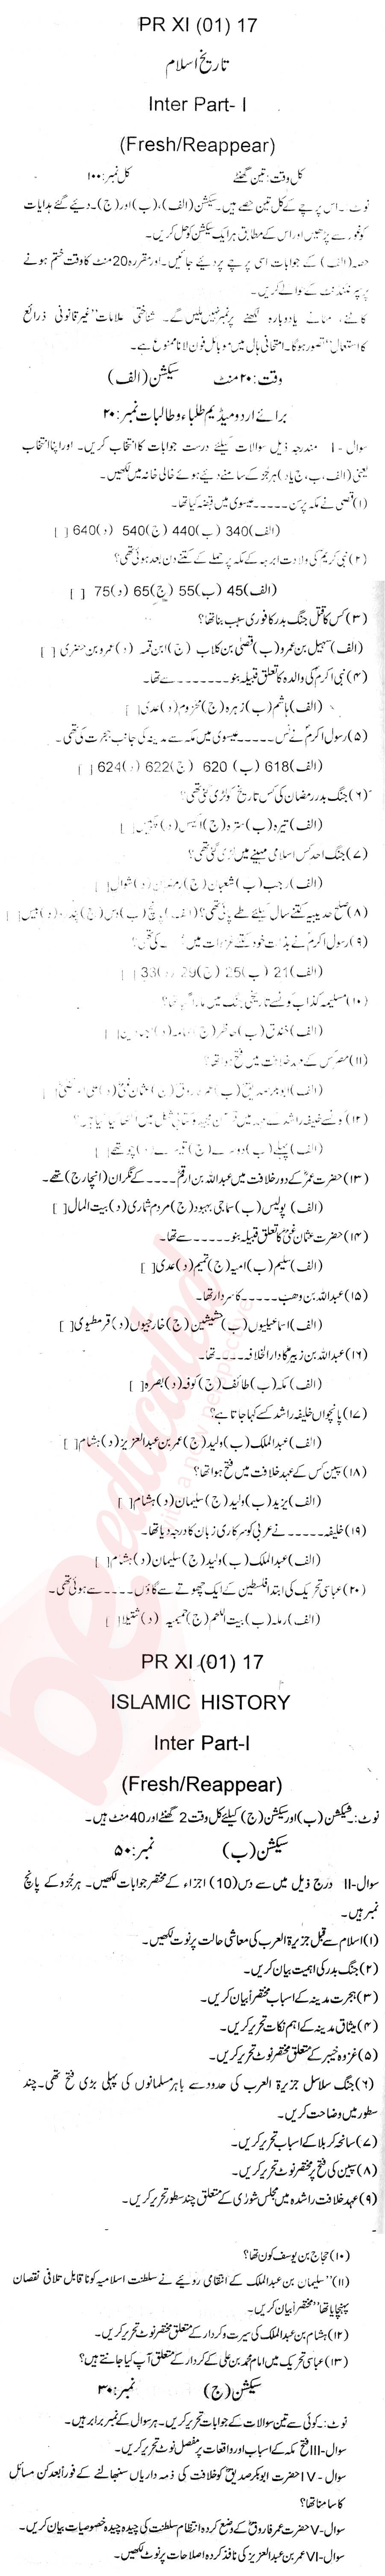 Islamic History FA Part 1 Past Paper Group 1 BISE Abbottabad 2017